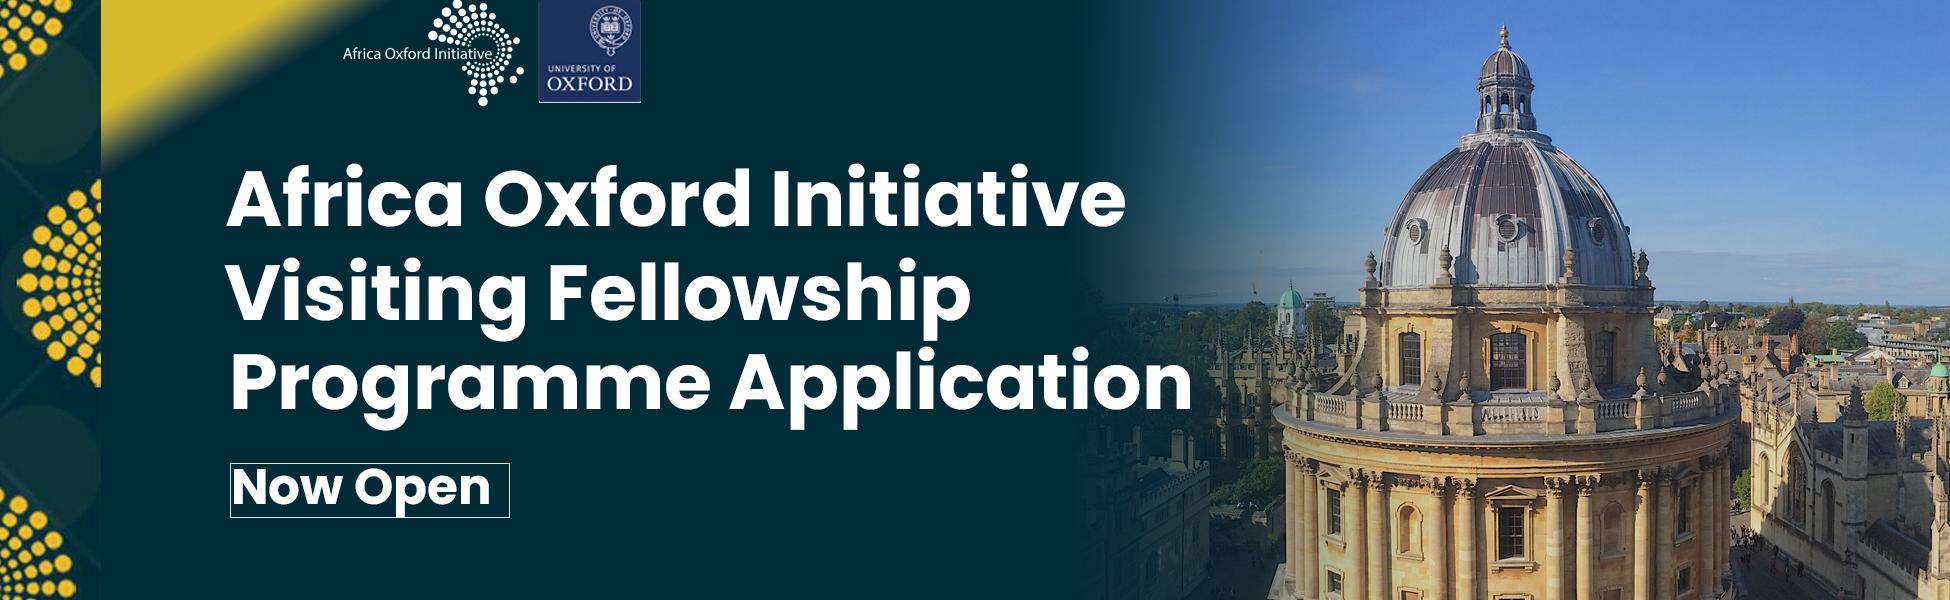 Africa Oxford Initiative Visiting Fellowship Programme application now open